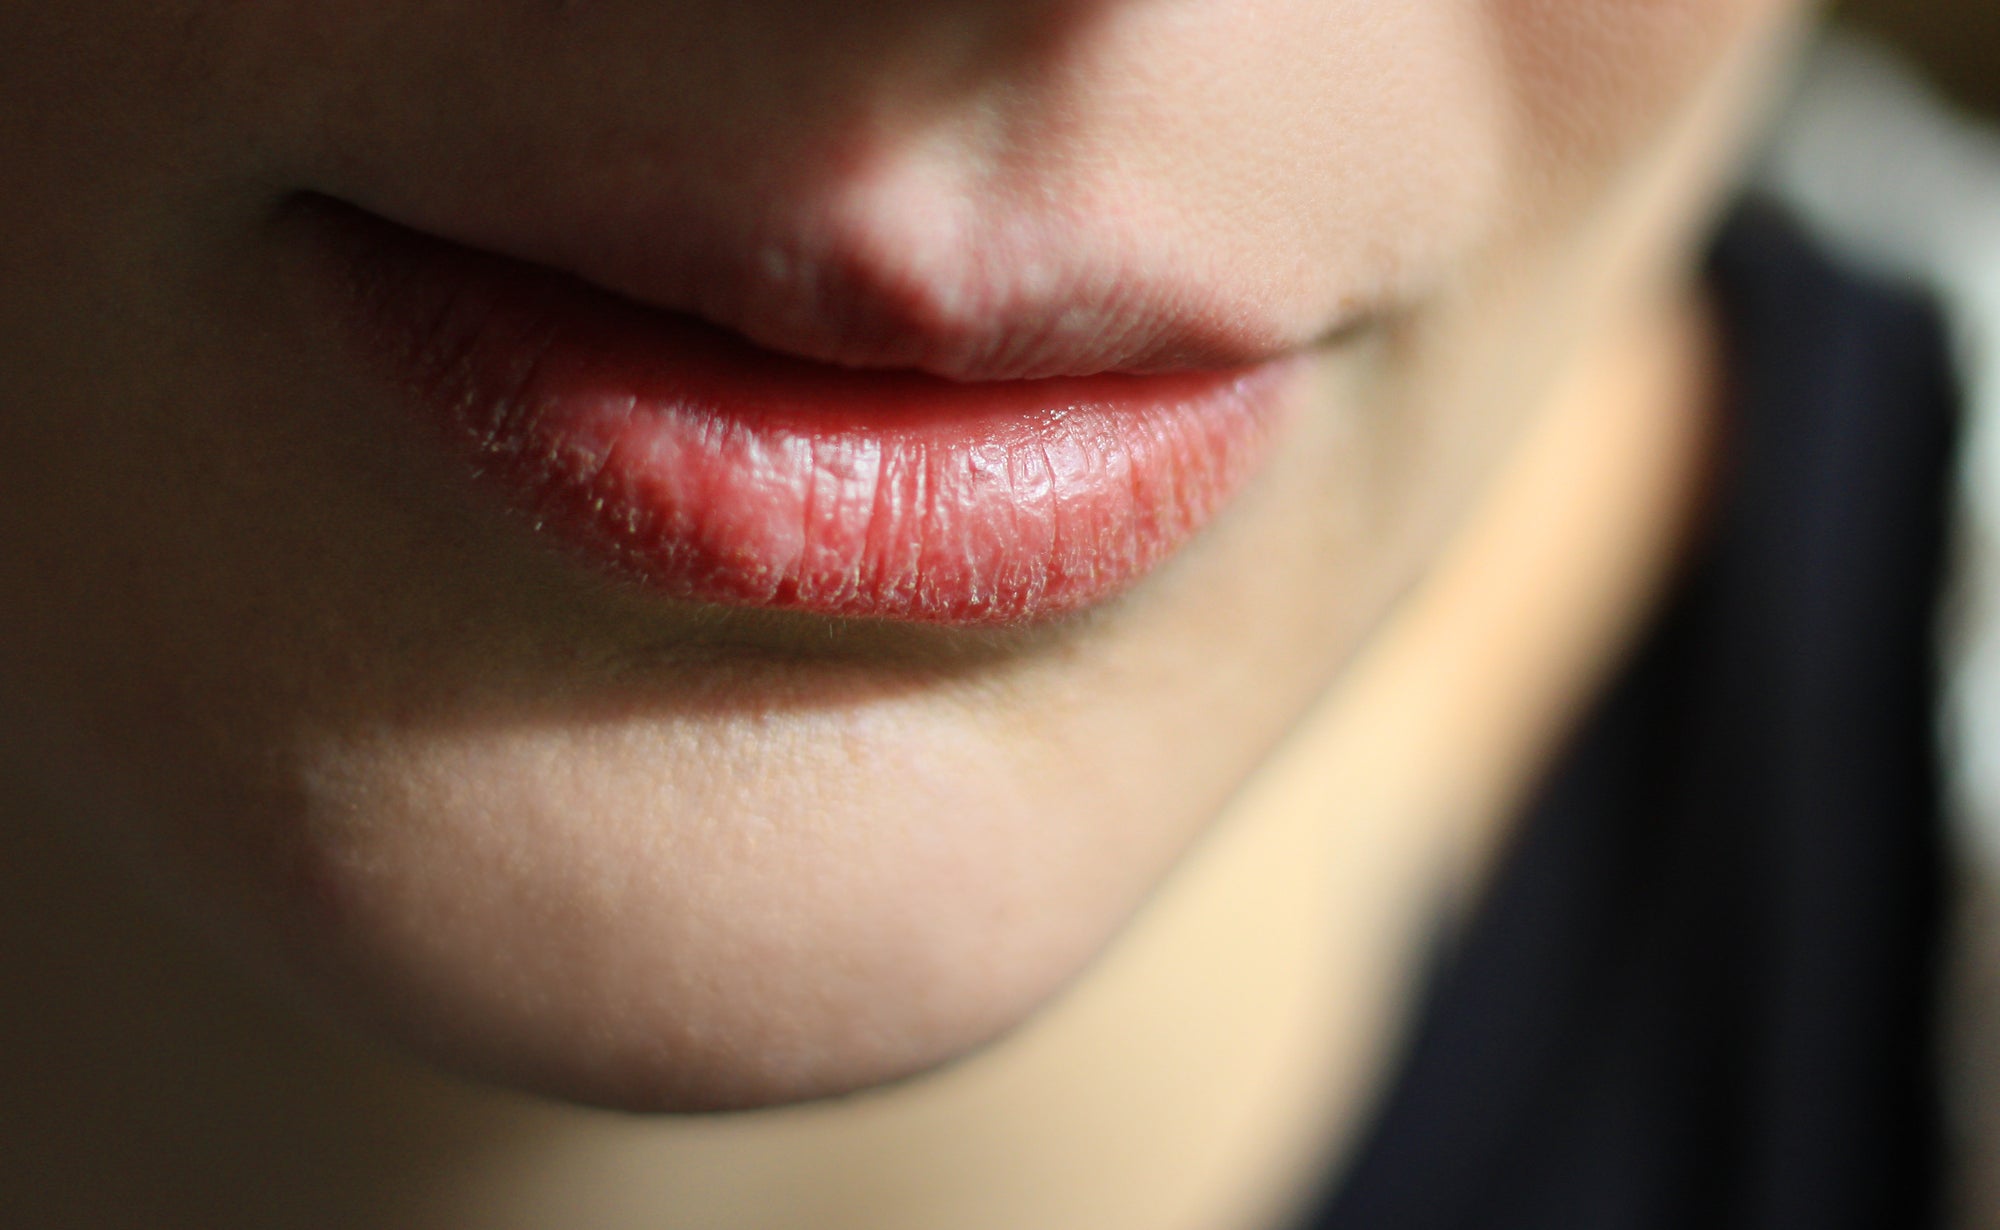 lips and chin of a woman